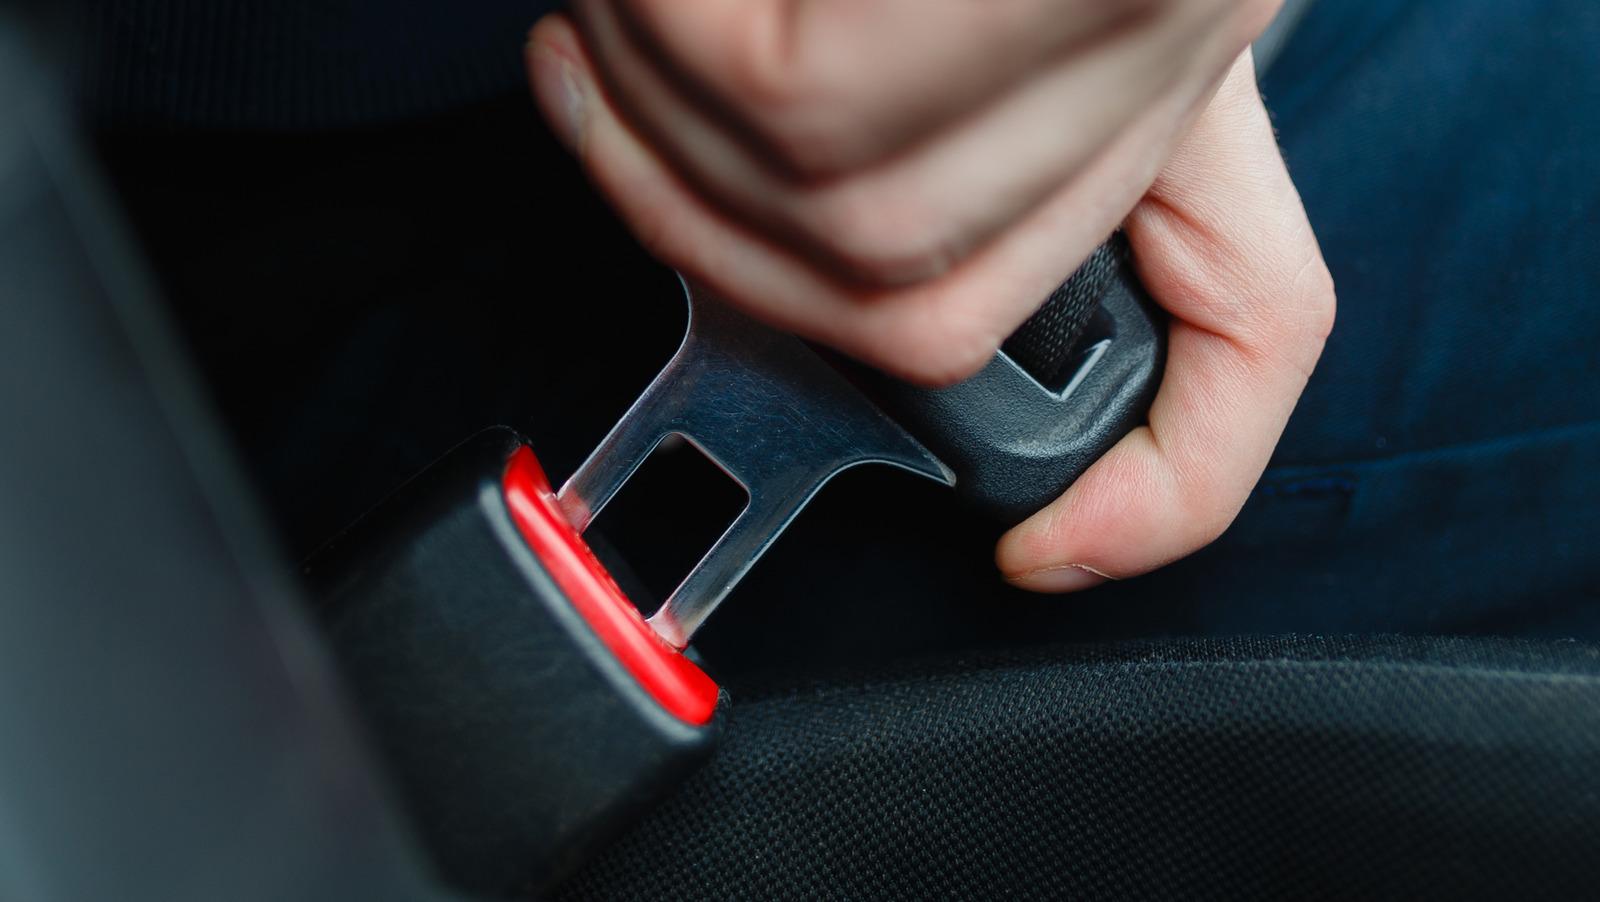 Hyundai cars have been recalled due to exploding seat belt tighteners